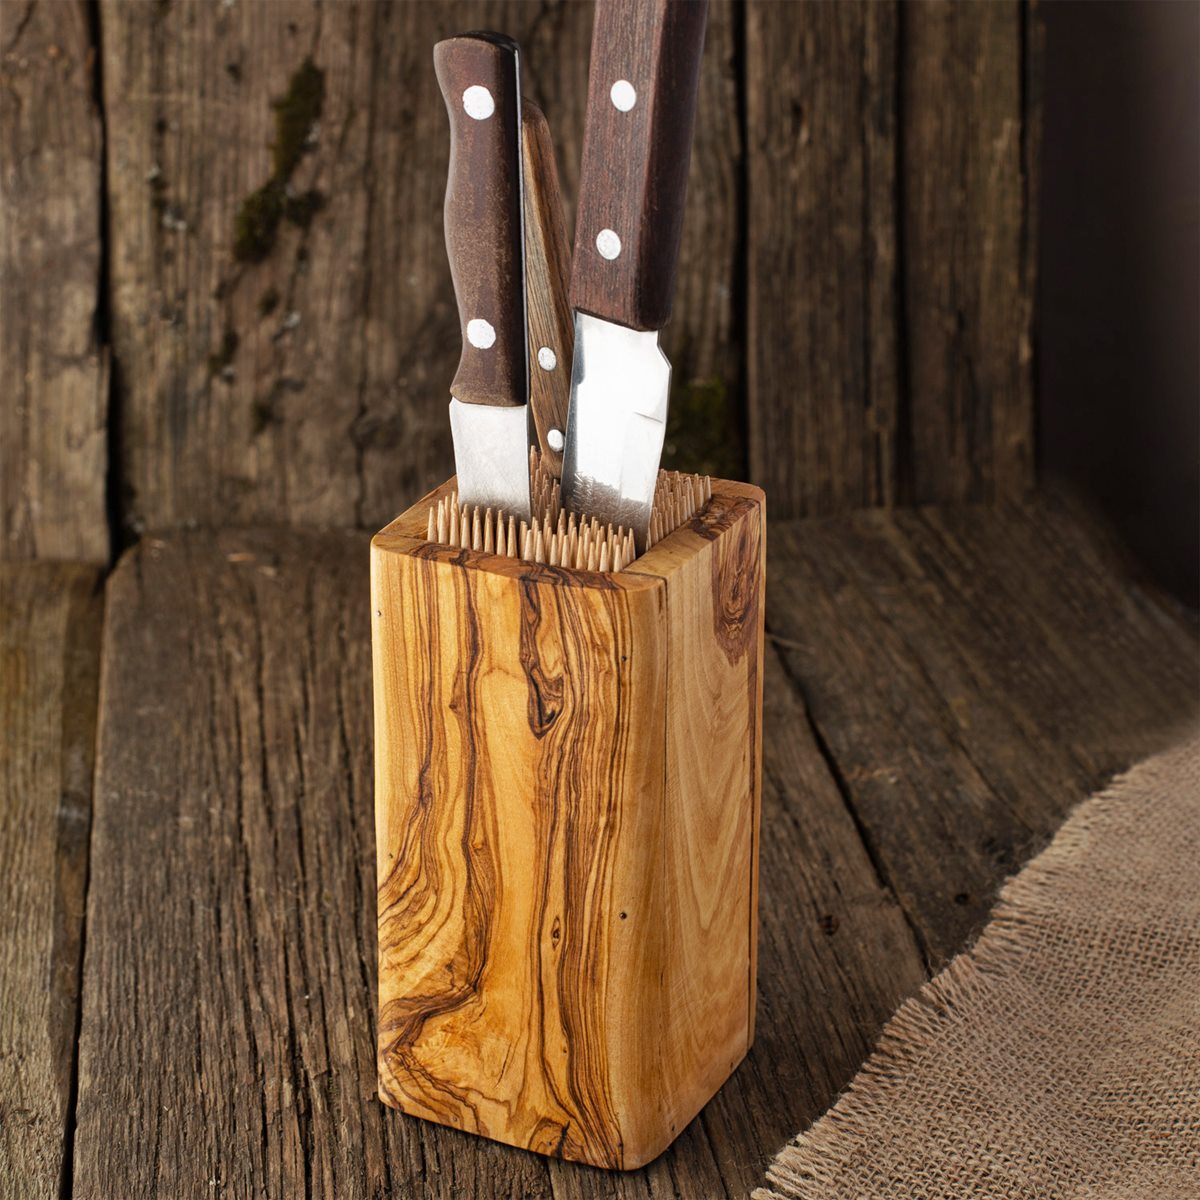 How To Make Knife Block With Skewers